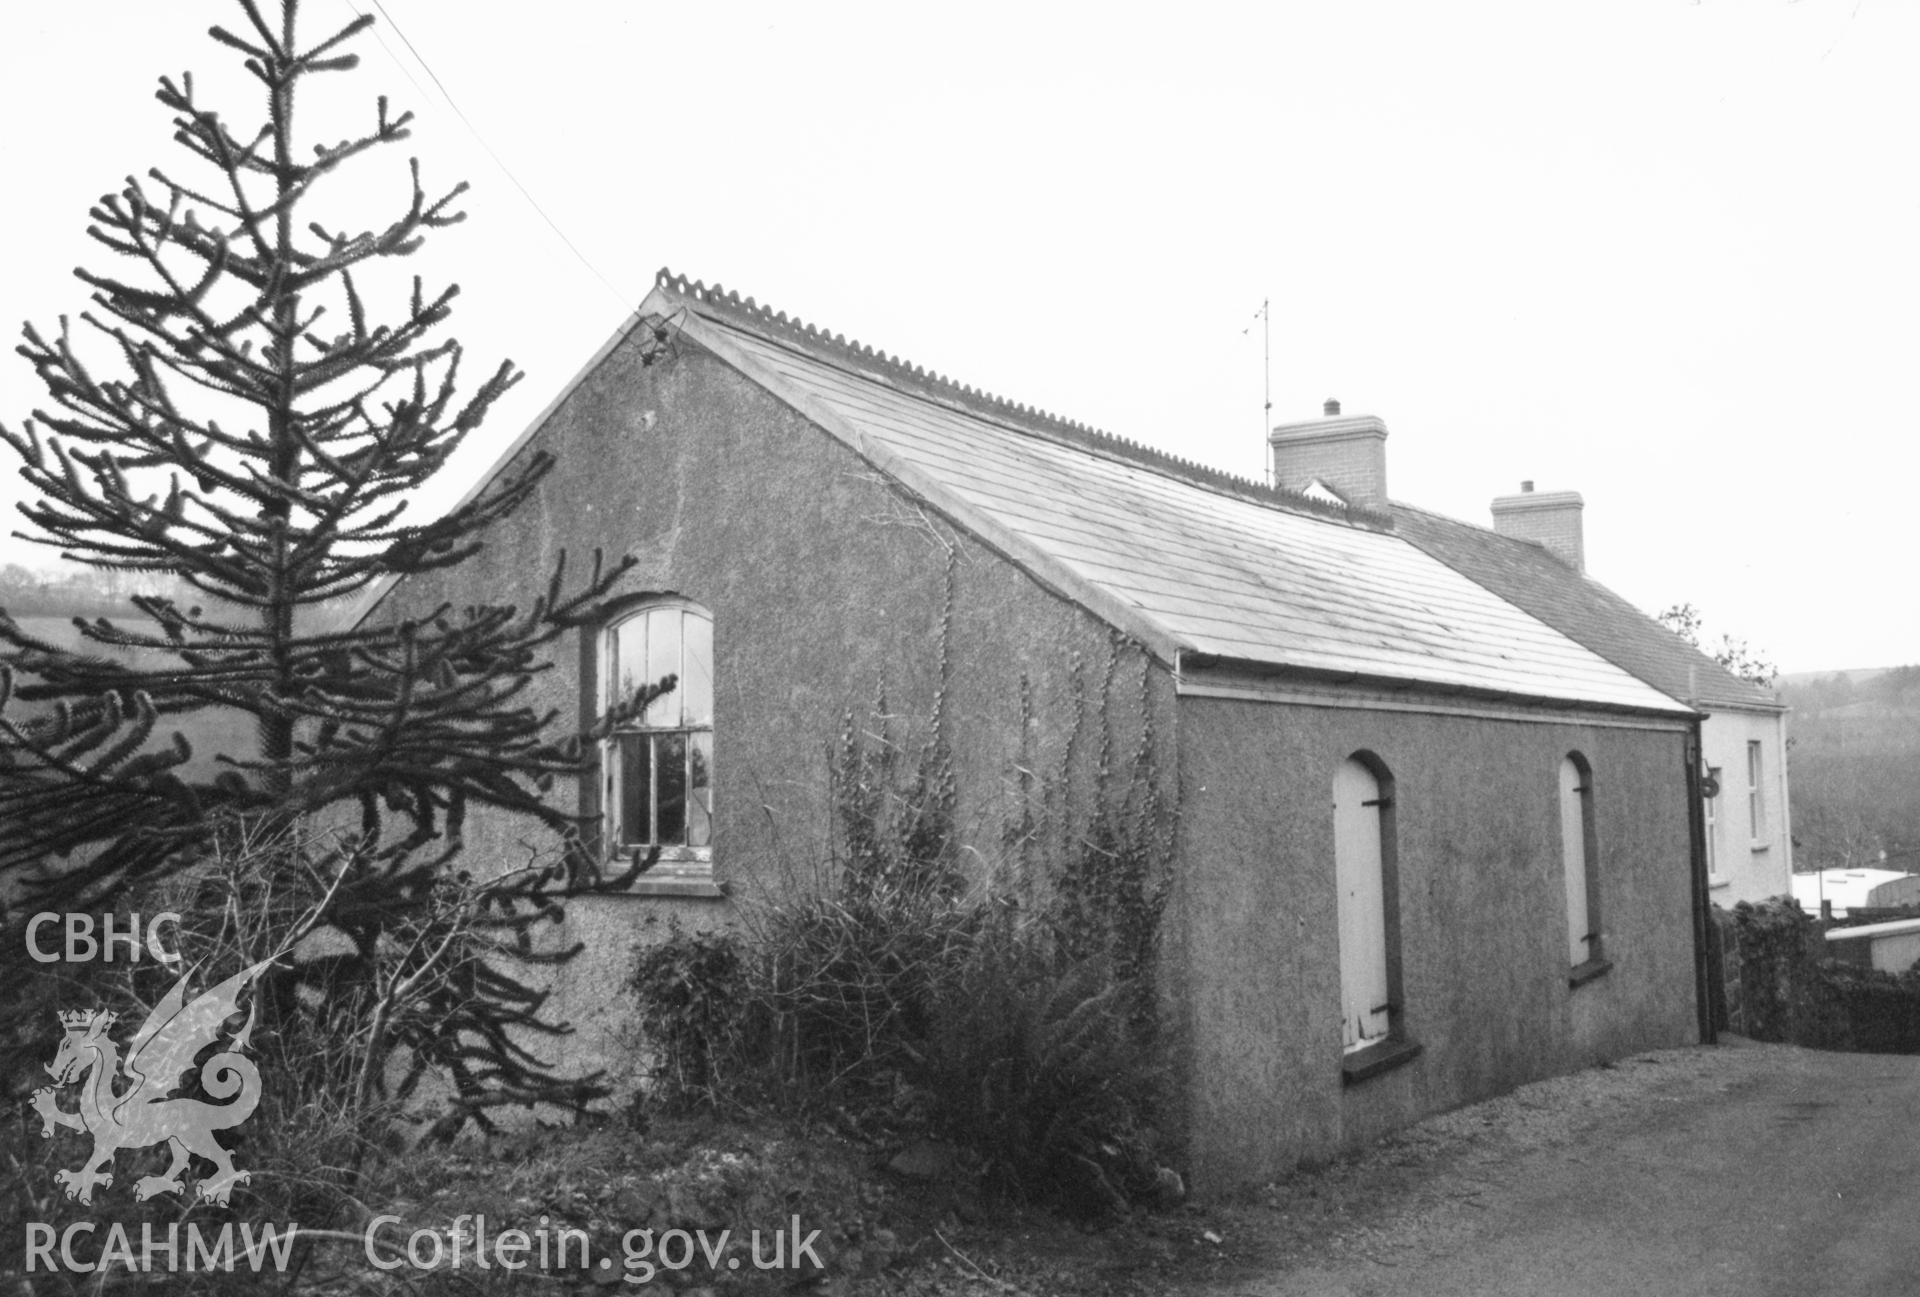 Digital copy of a black and white photograph showing exterior view of Elim Congregational Sunday School, Stepaside, taken by Robert Scourfield, 1996.